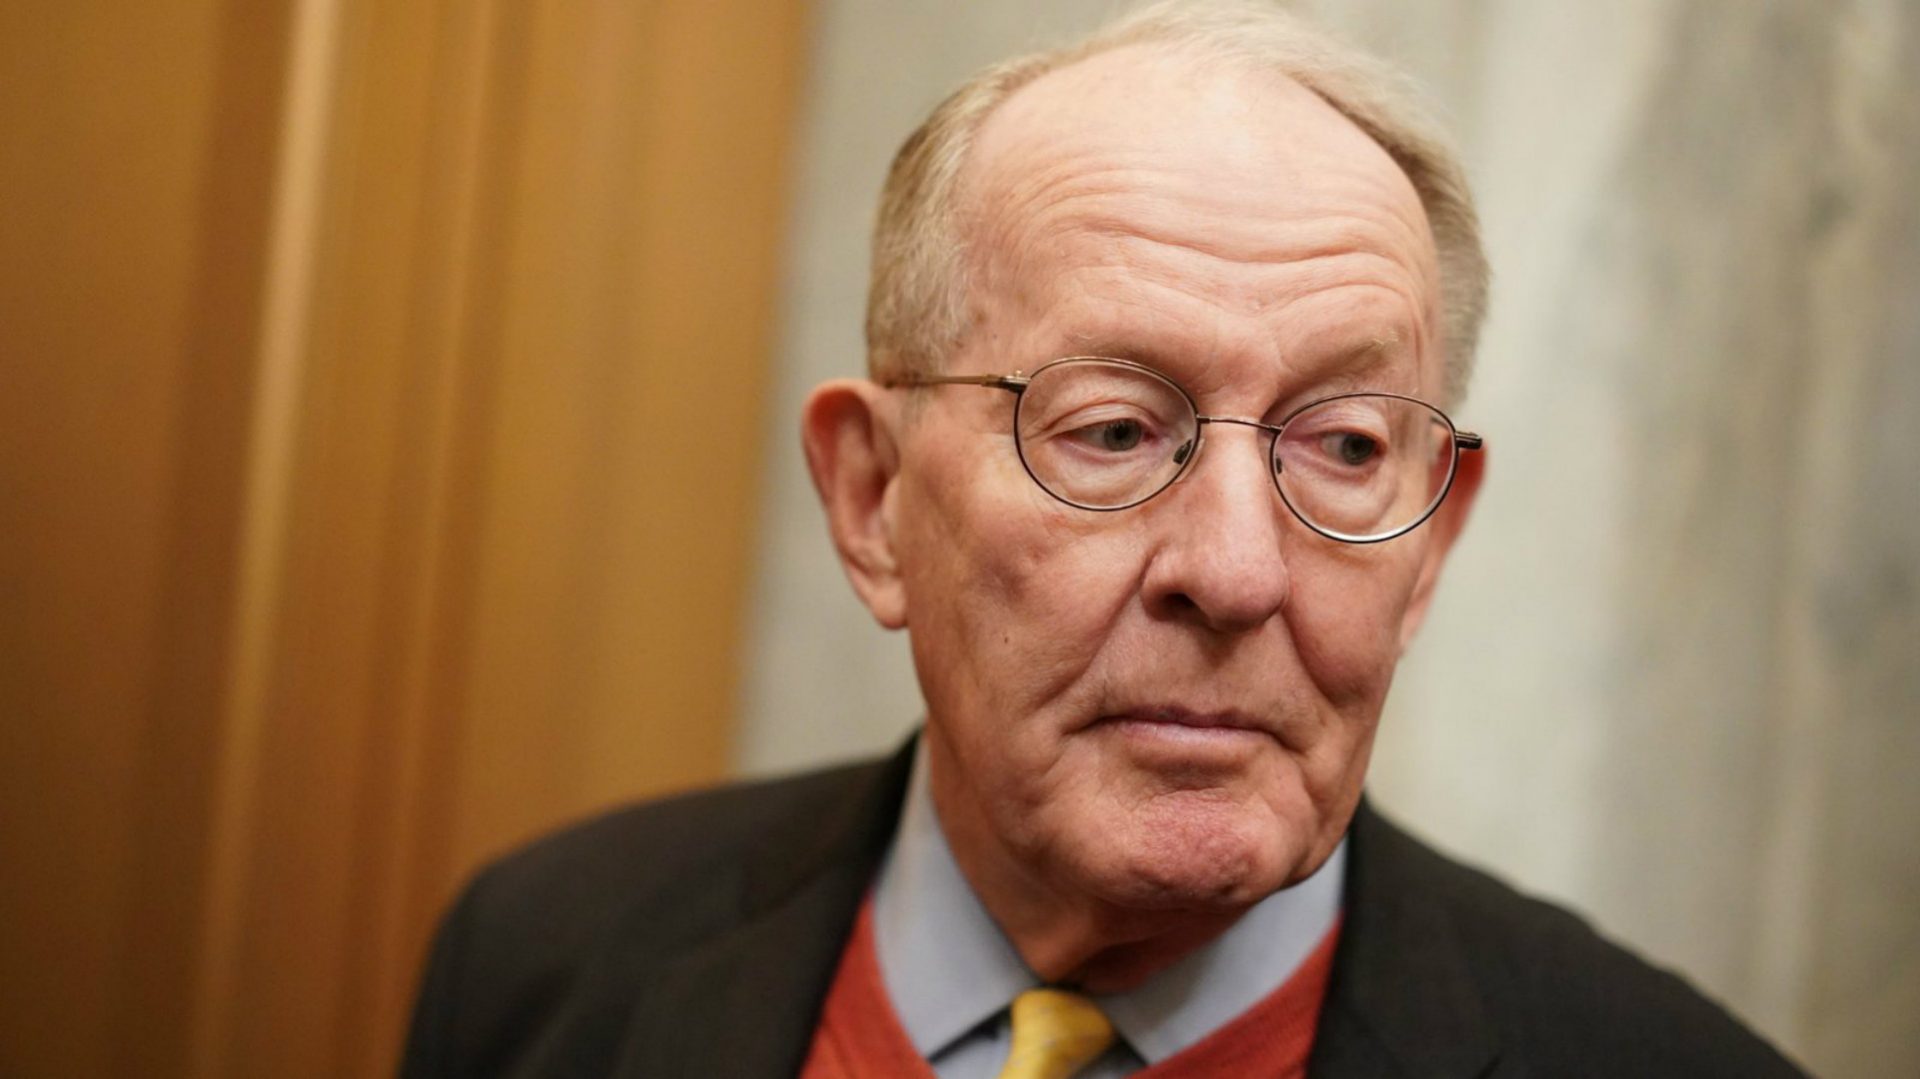 Sen. Lamar Alexander, R-Tenn., arrives for the impeachment trial of President Trump at the Capitol on Friday. Alexander, a key vote in the trial, says he plans to vote no on hearing witnesses.